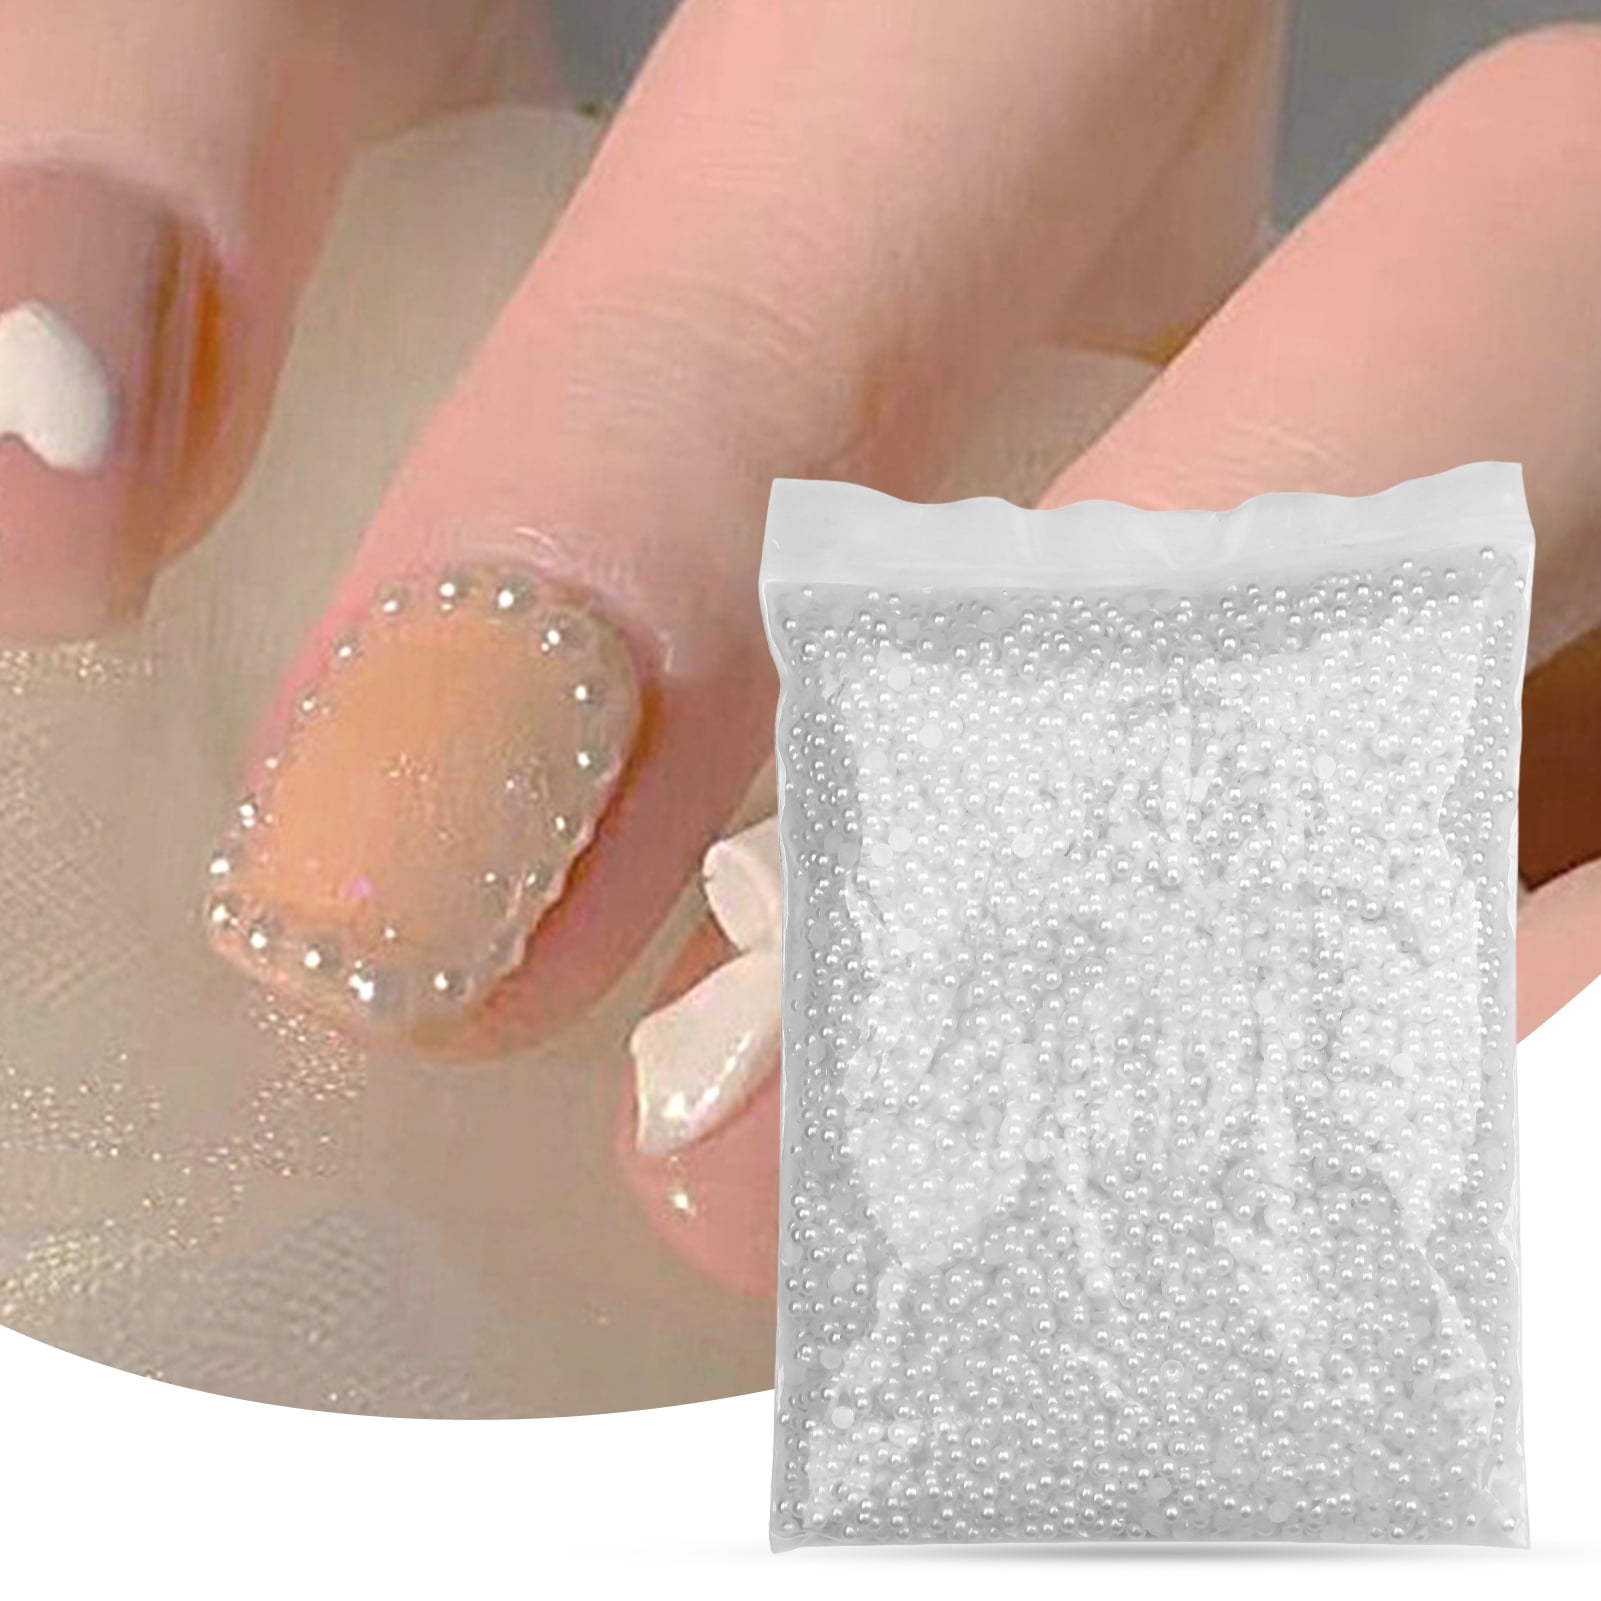 Genie Crafts 16000 Pieces of Flat Back Pearl Nail Gems for DIY